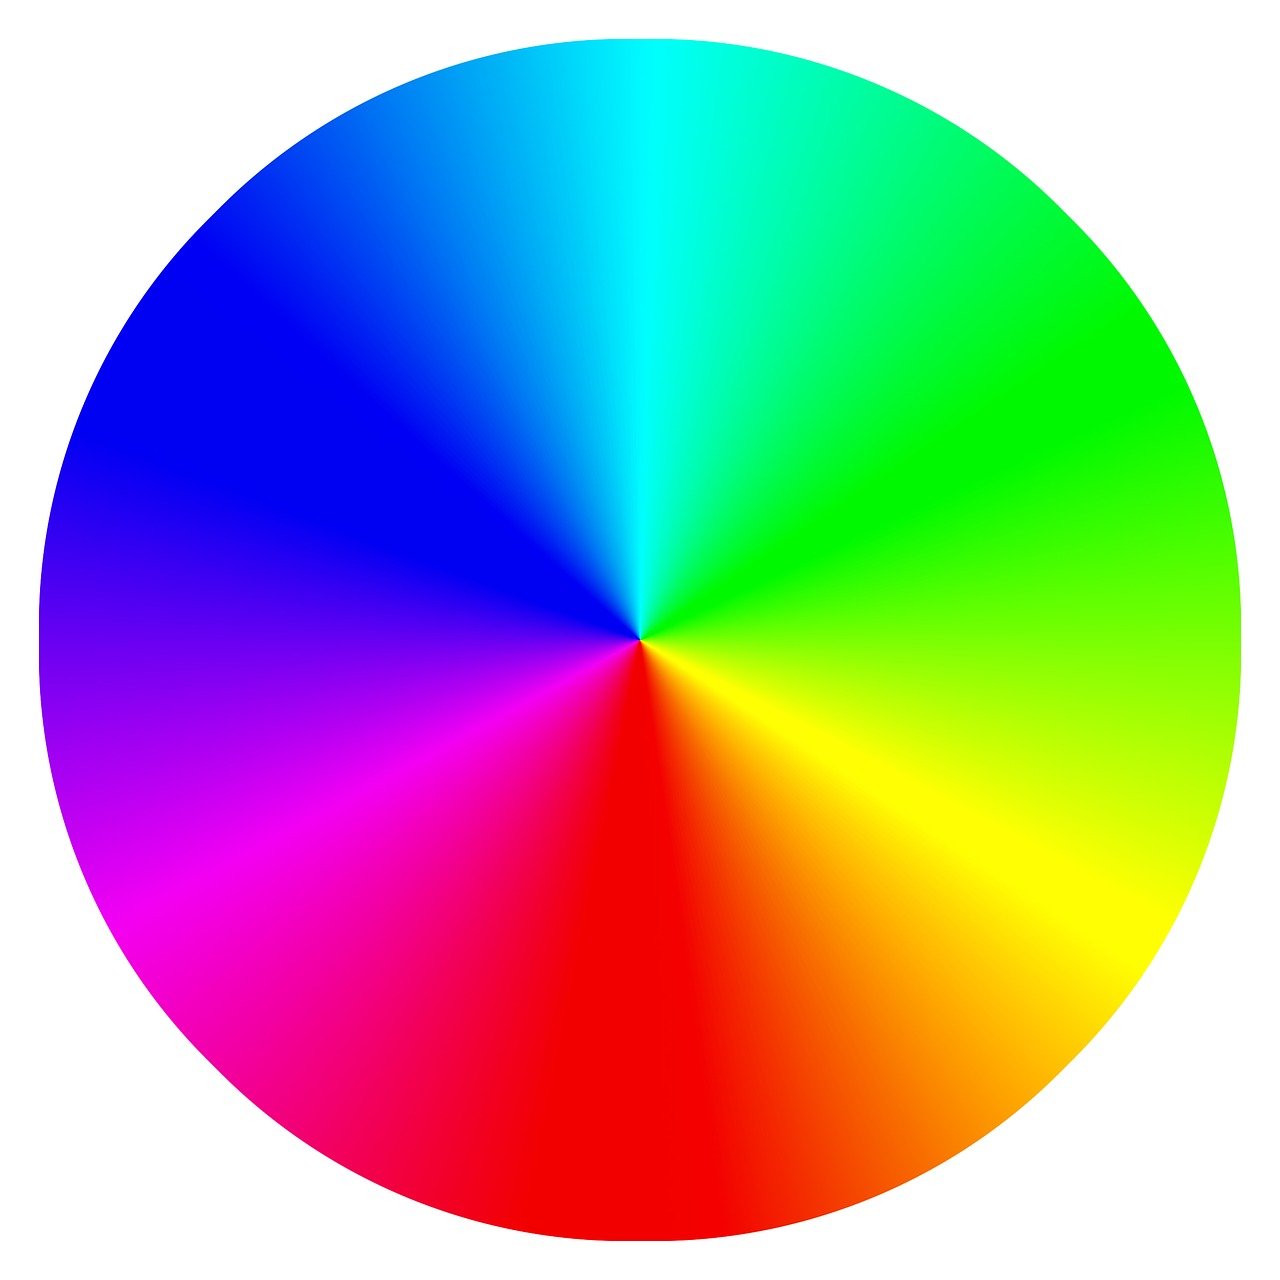 a rainbow colored circle with a white background, a digital rendering, proper shading, wheel, thisset colours, warm color gradient